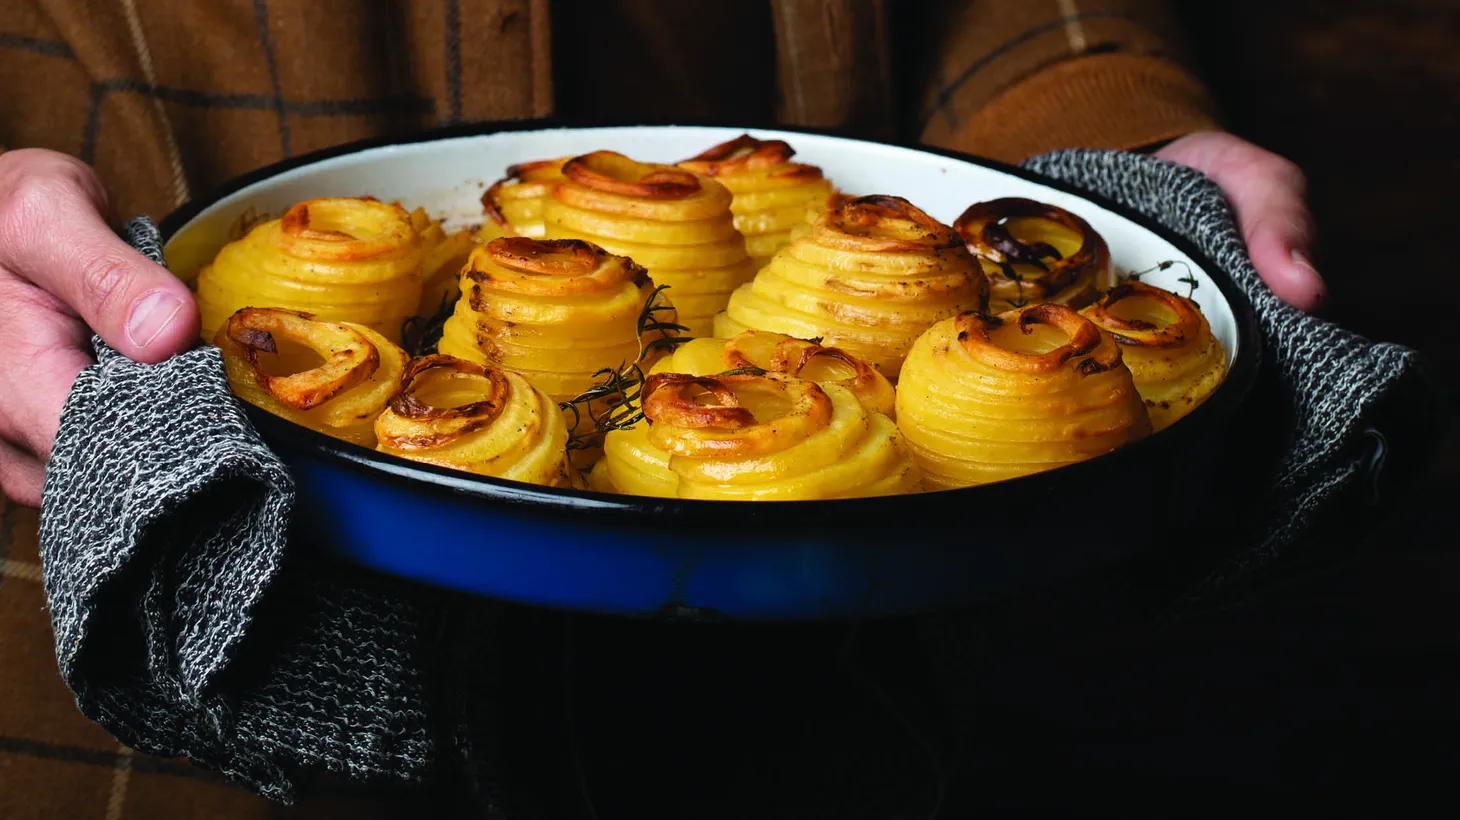 Using a spiralizer that her husband brought home from Fleet Supply Store, Amy Thielen puts a new spin on roasted potatoes.